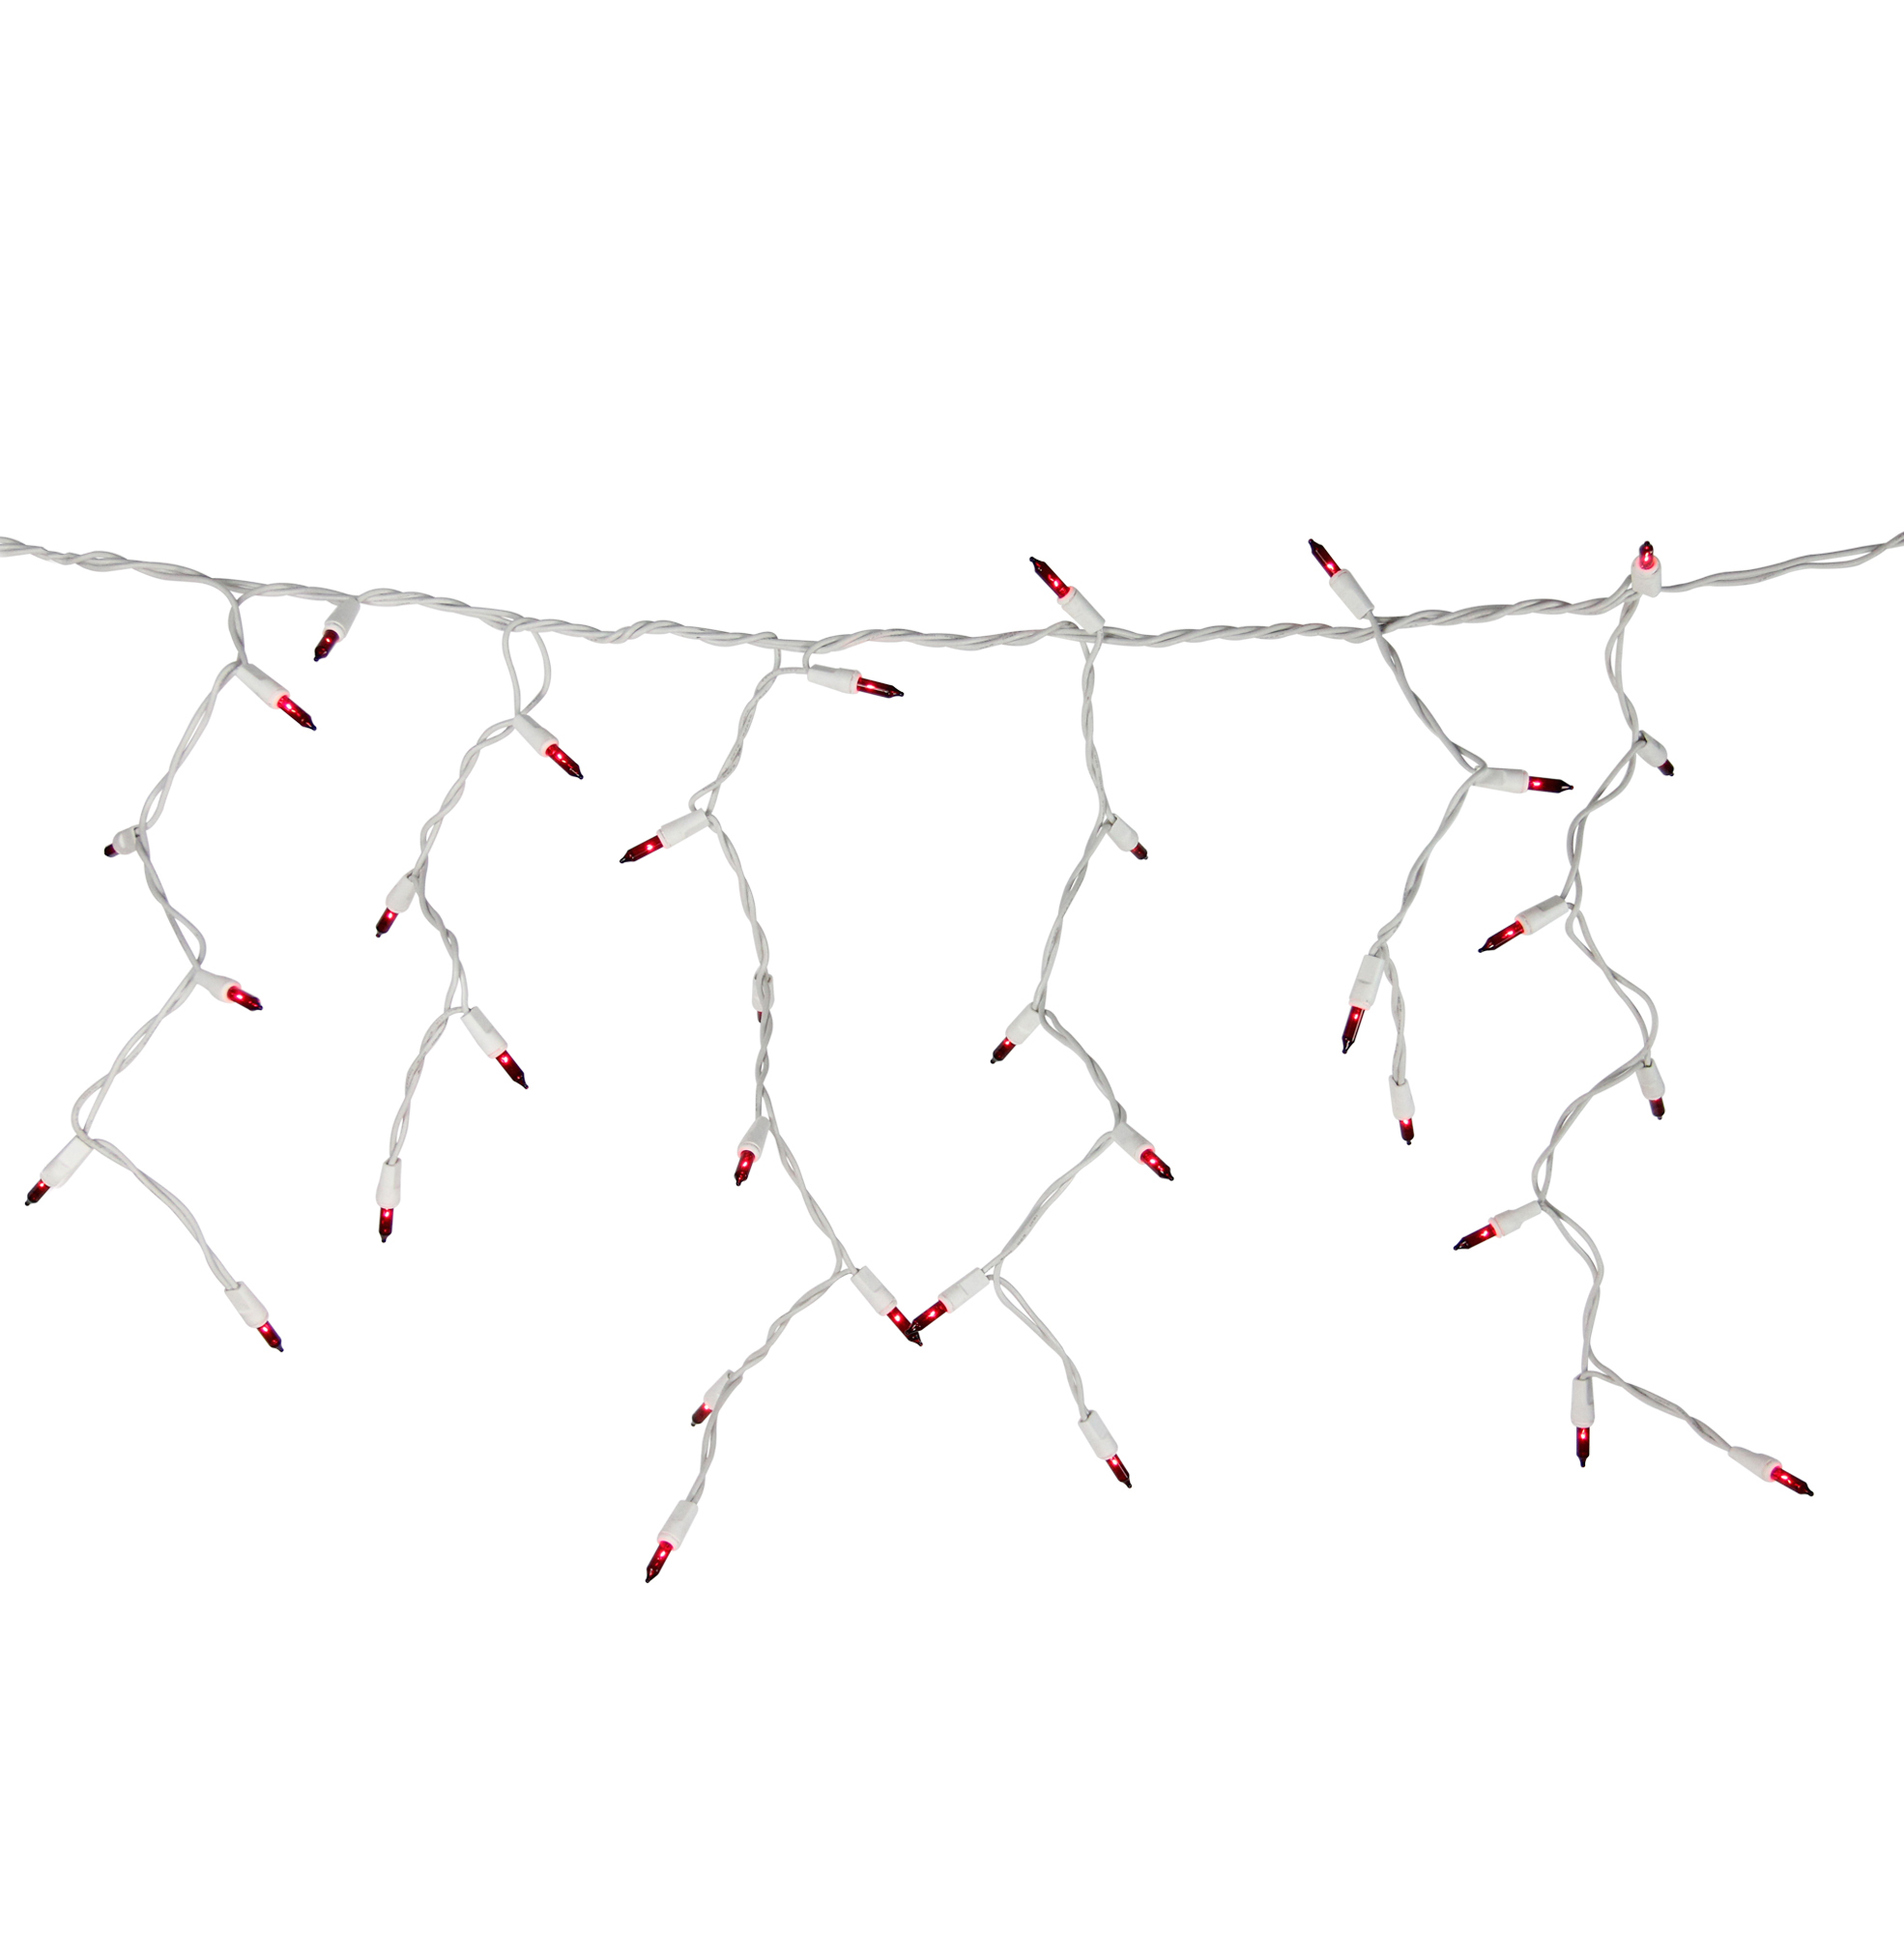 Northlight 100 Count Red Mini Icicle Christmas Lights - 3.5 ft White Wire